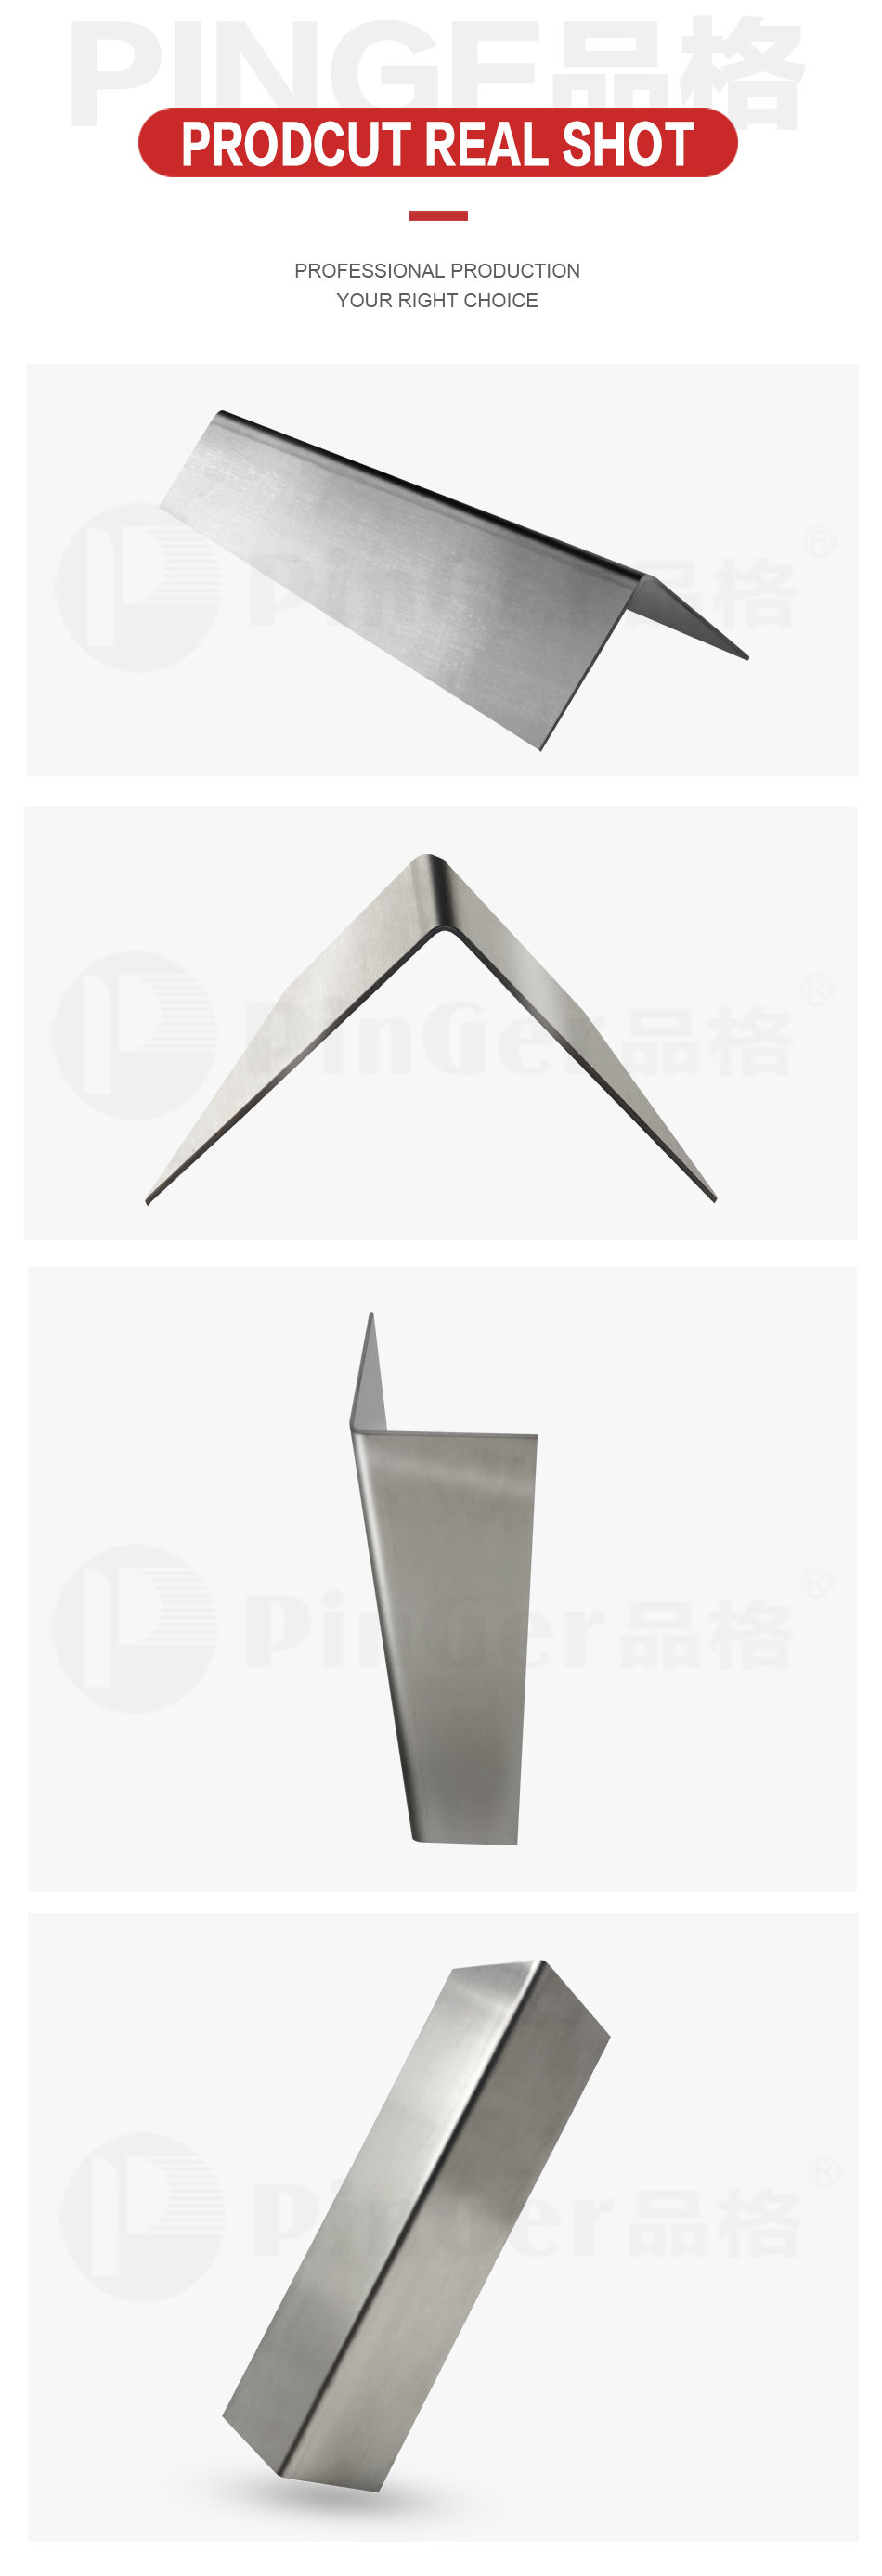 Brushed Finish Stainless Steel Corner Guards